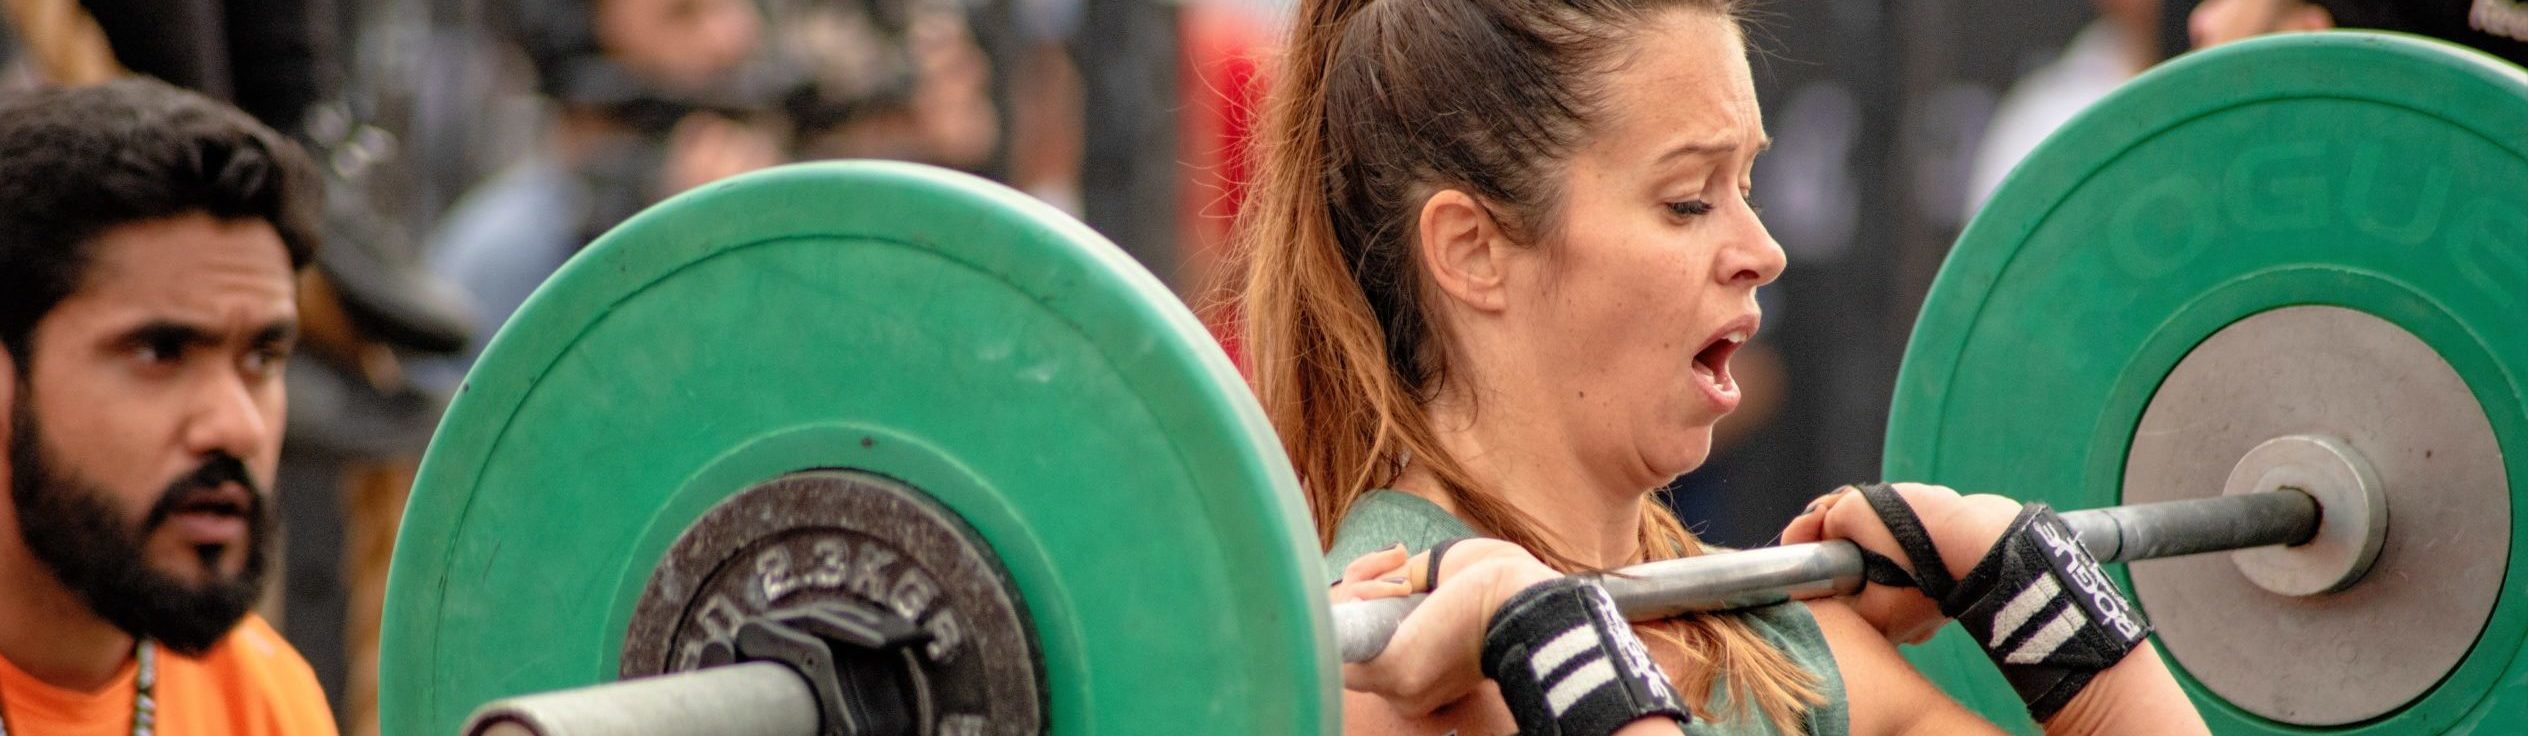 Why Am I Struggling To Lift Heavier Weights? - Vitruve